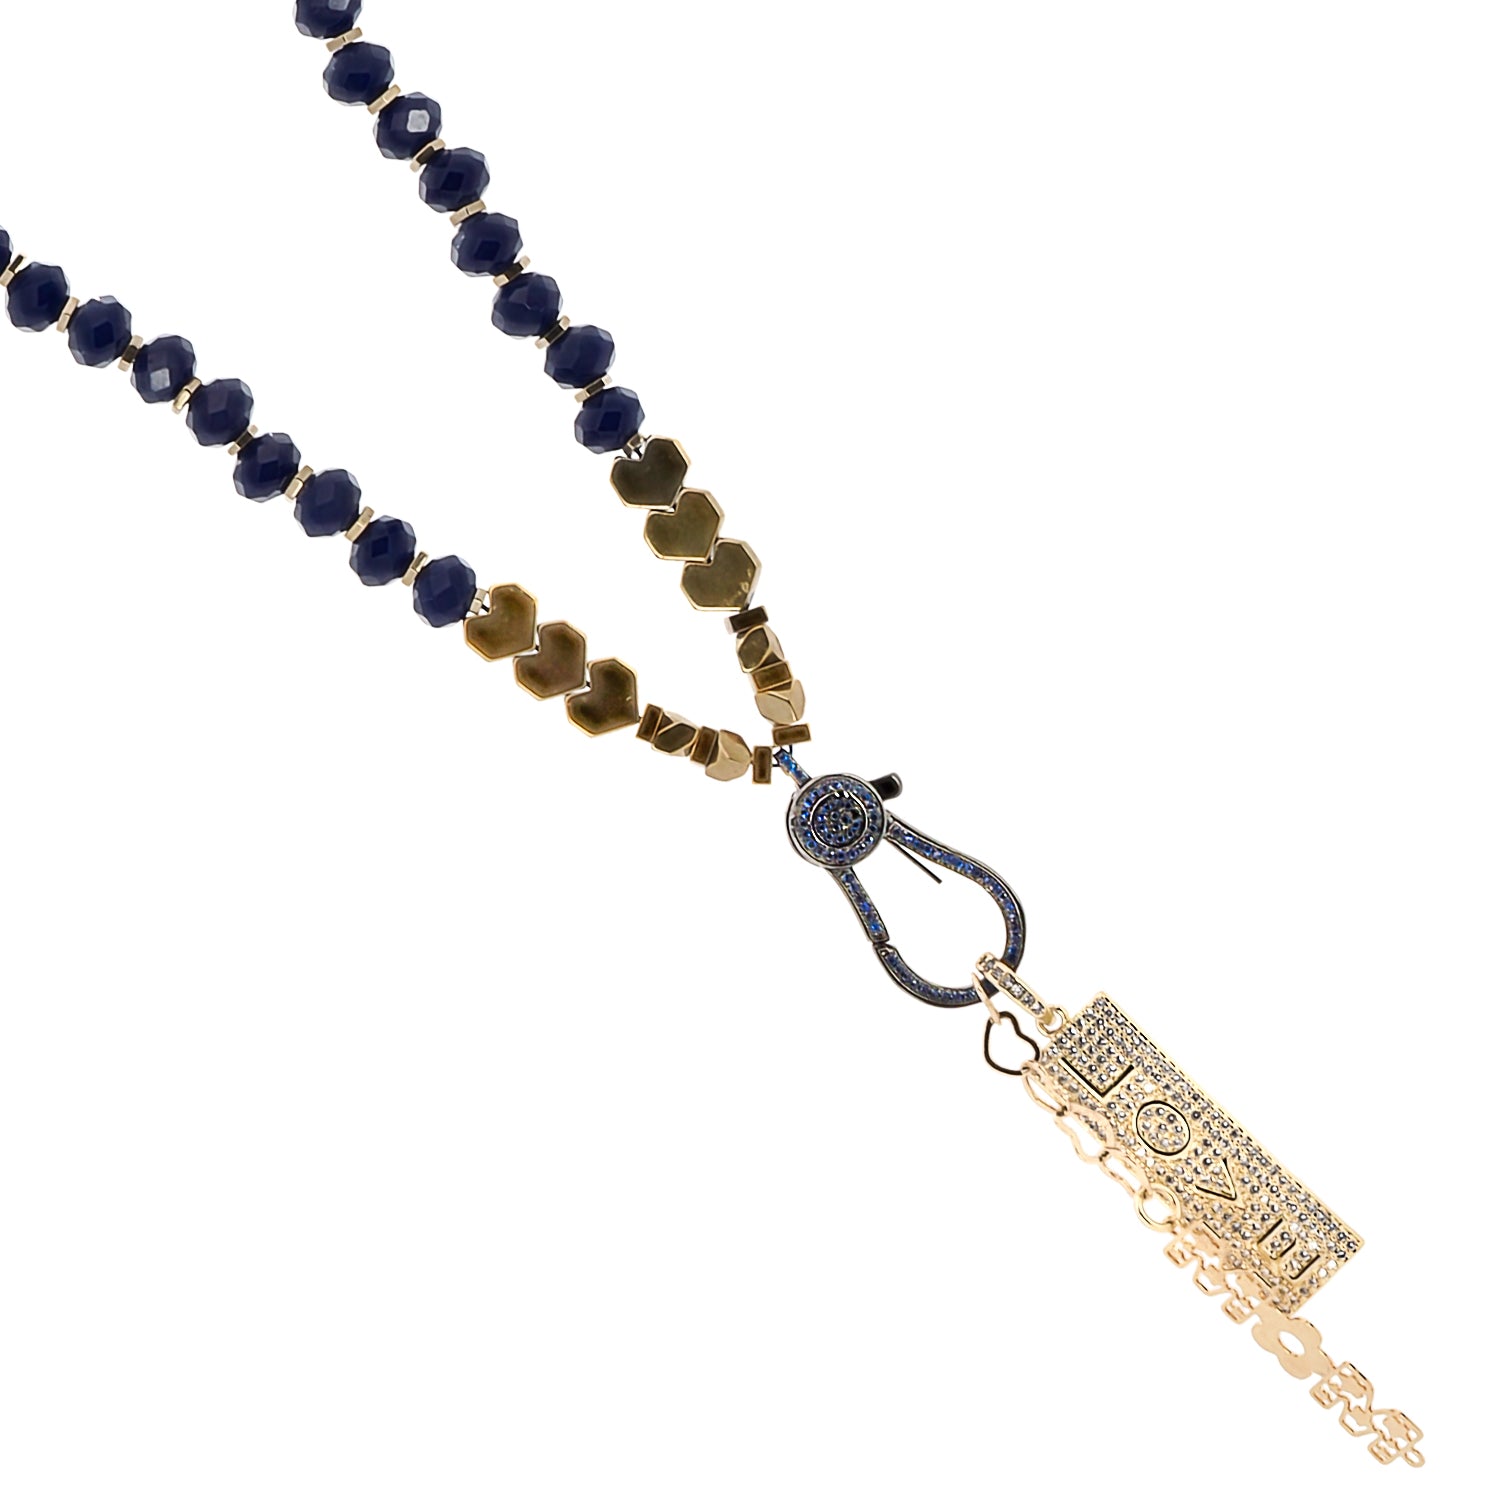 Close-up of the 24K gold plated Mom charm on the blue crystal necklace